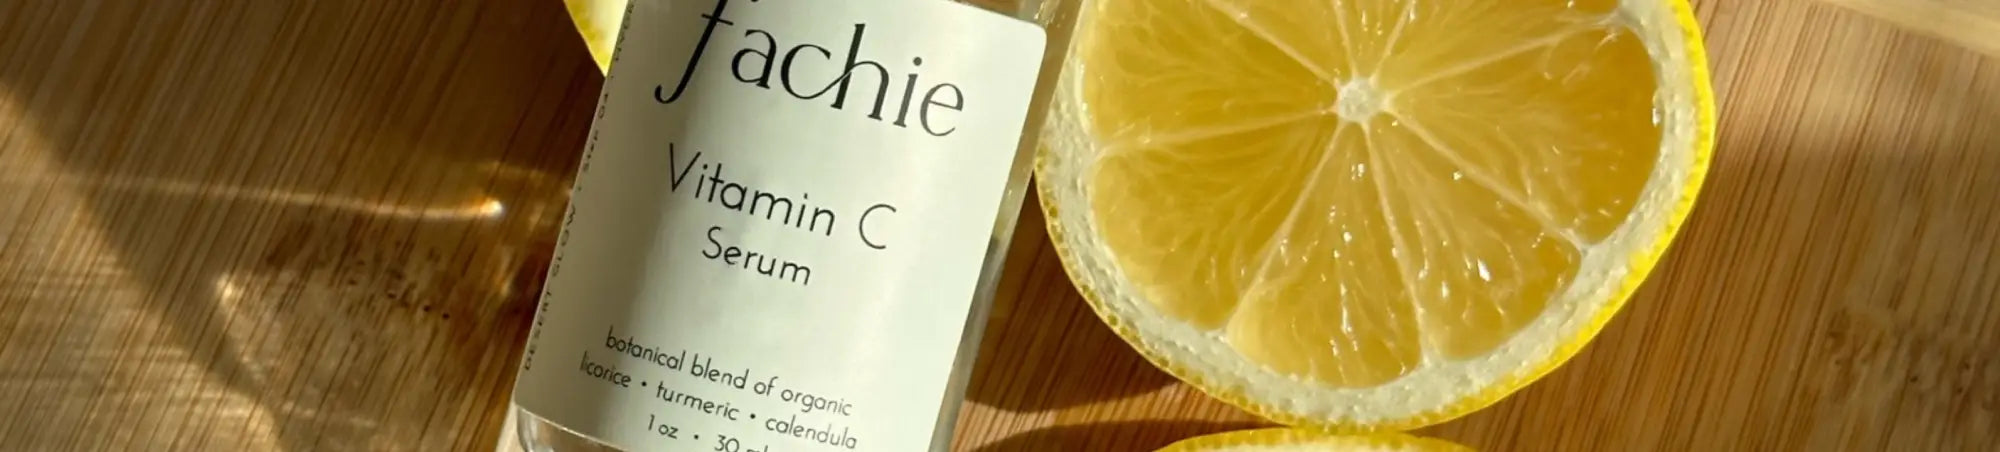 Products with Vitamin C - Fachie